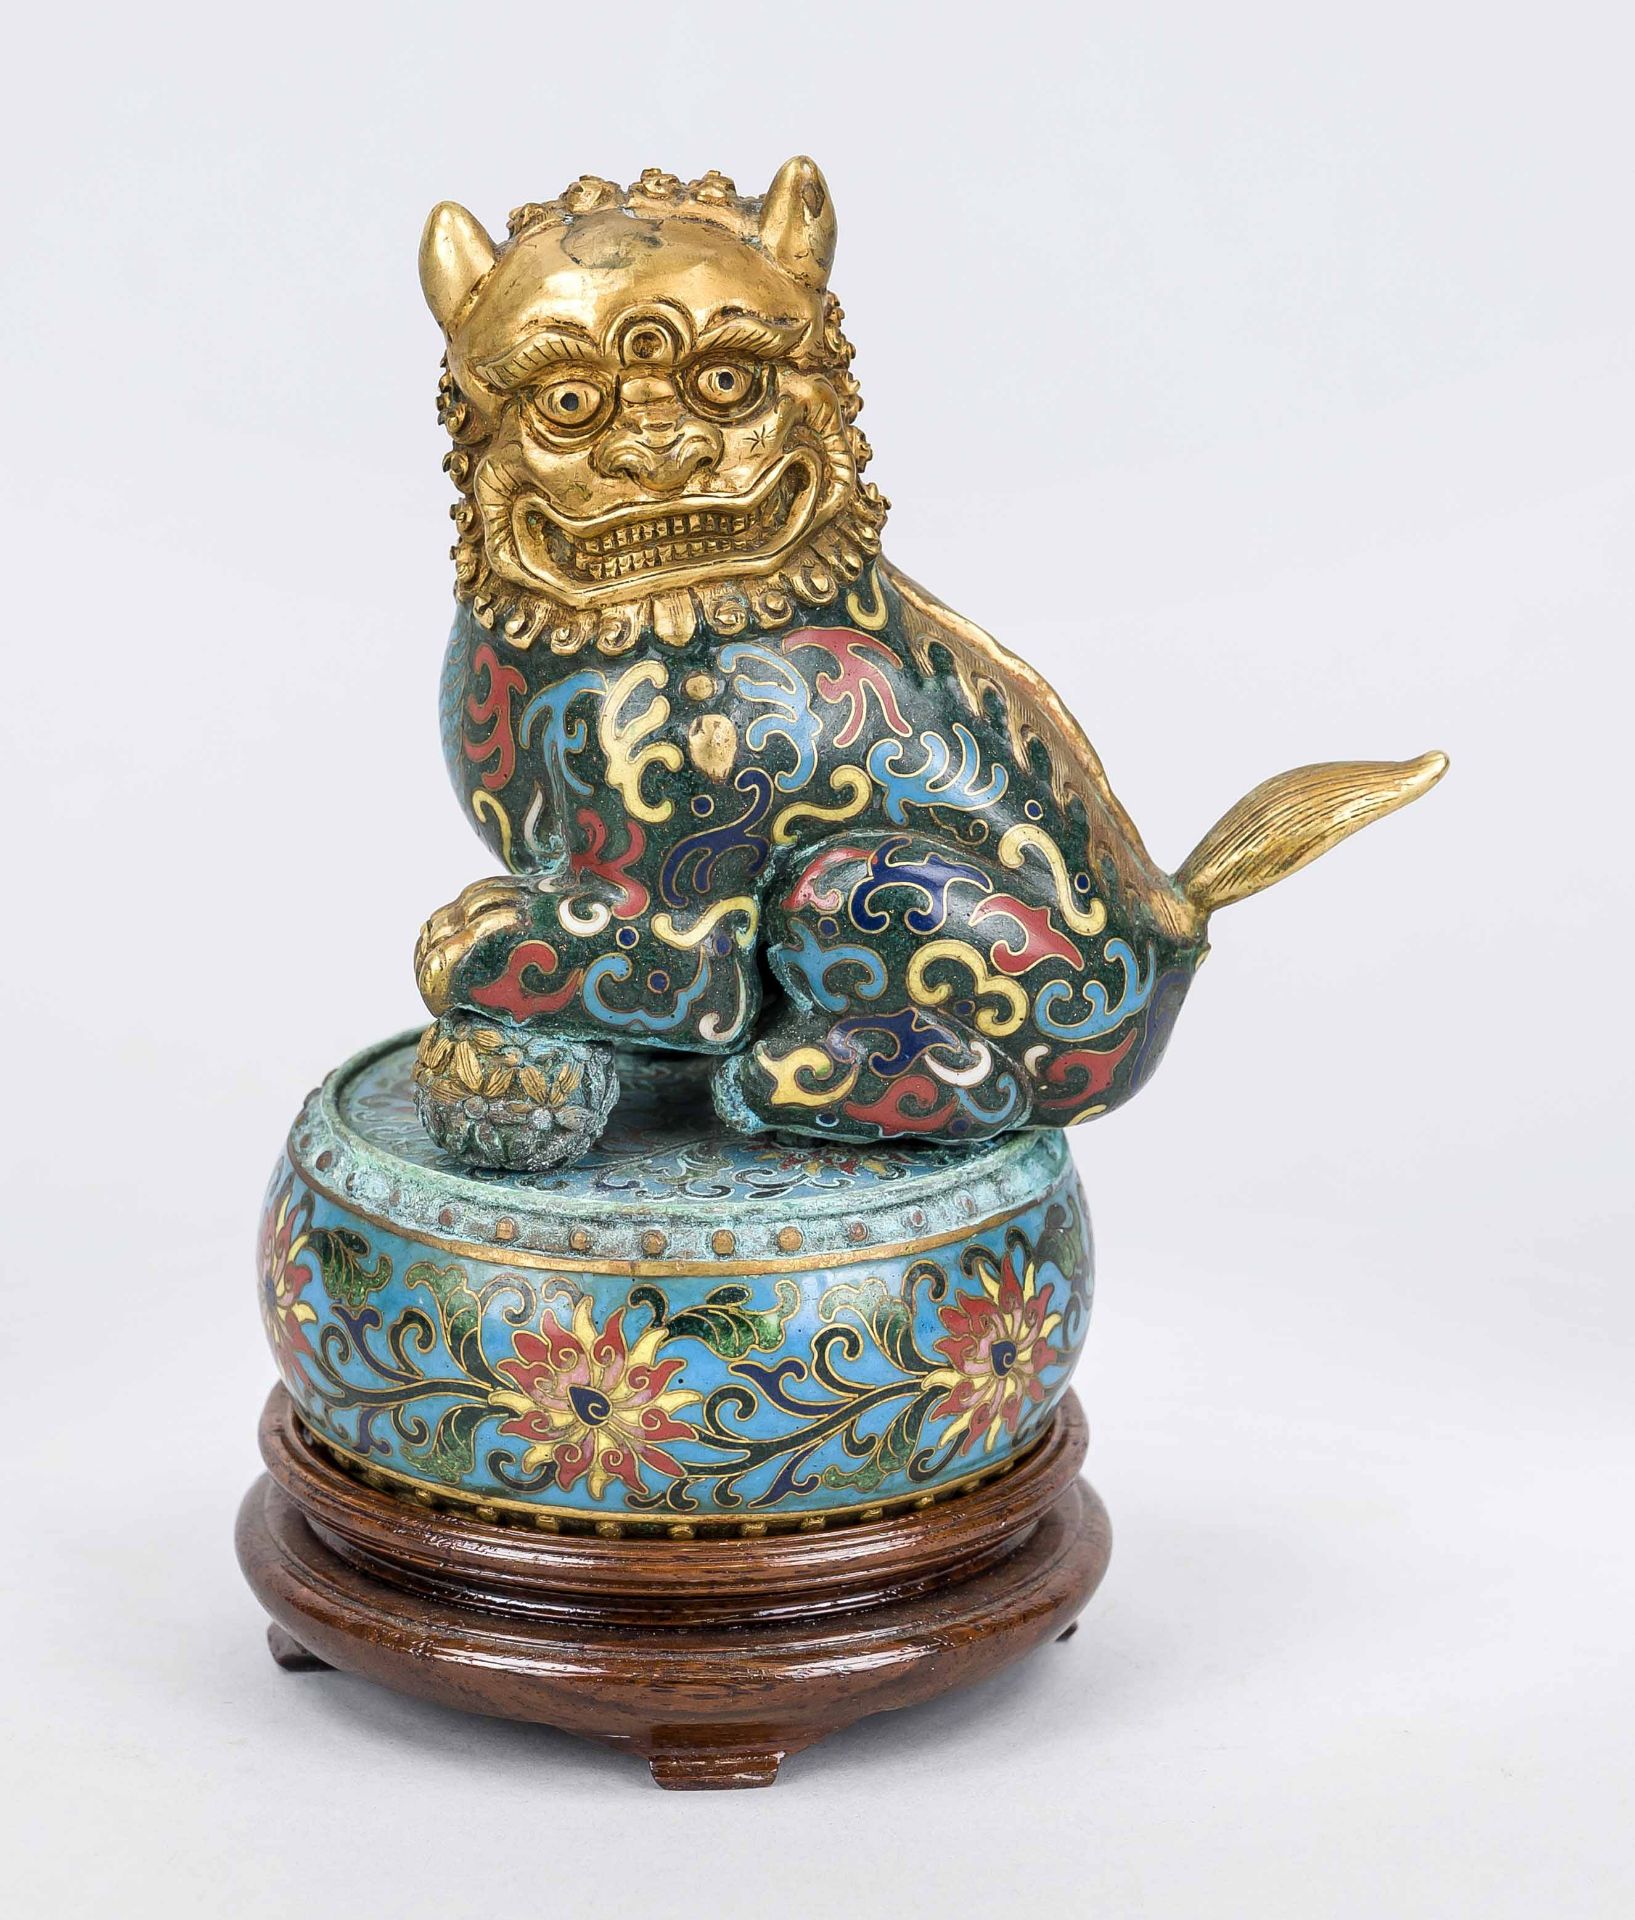 Cloisonné Fo lion (guardian figure), China 19th century (Qing). Seated on a drum-shaped base with